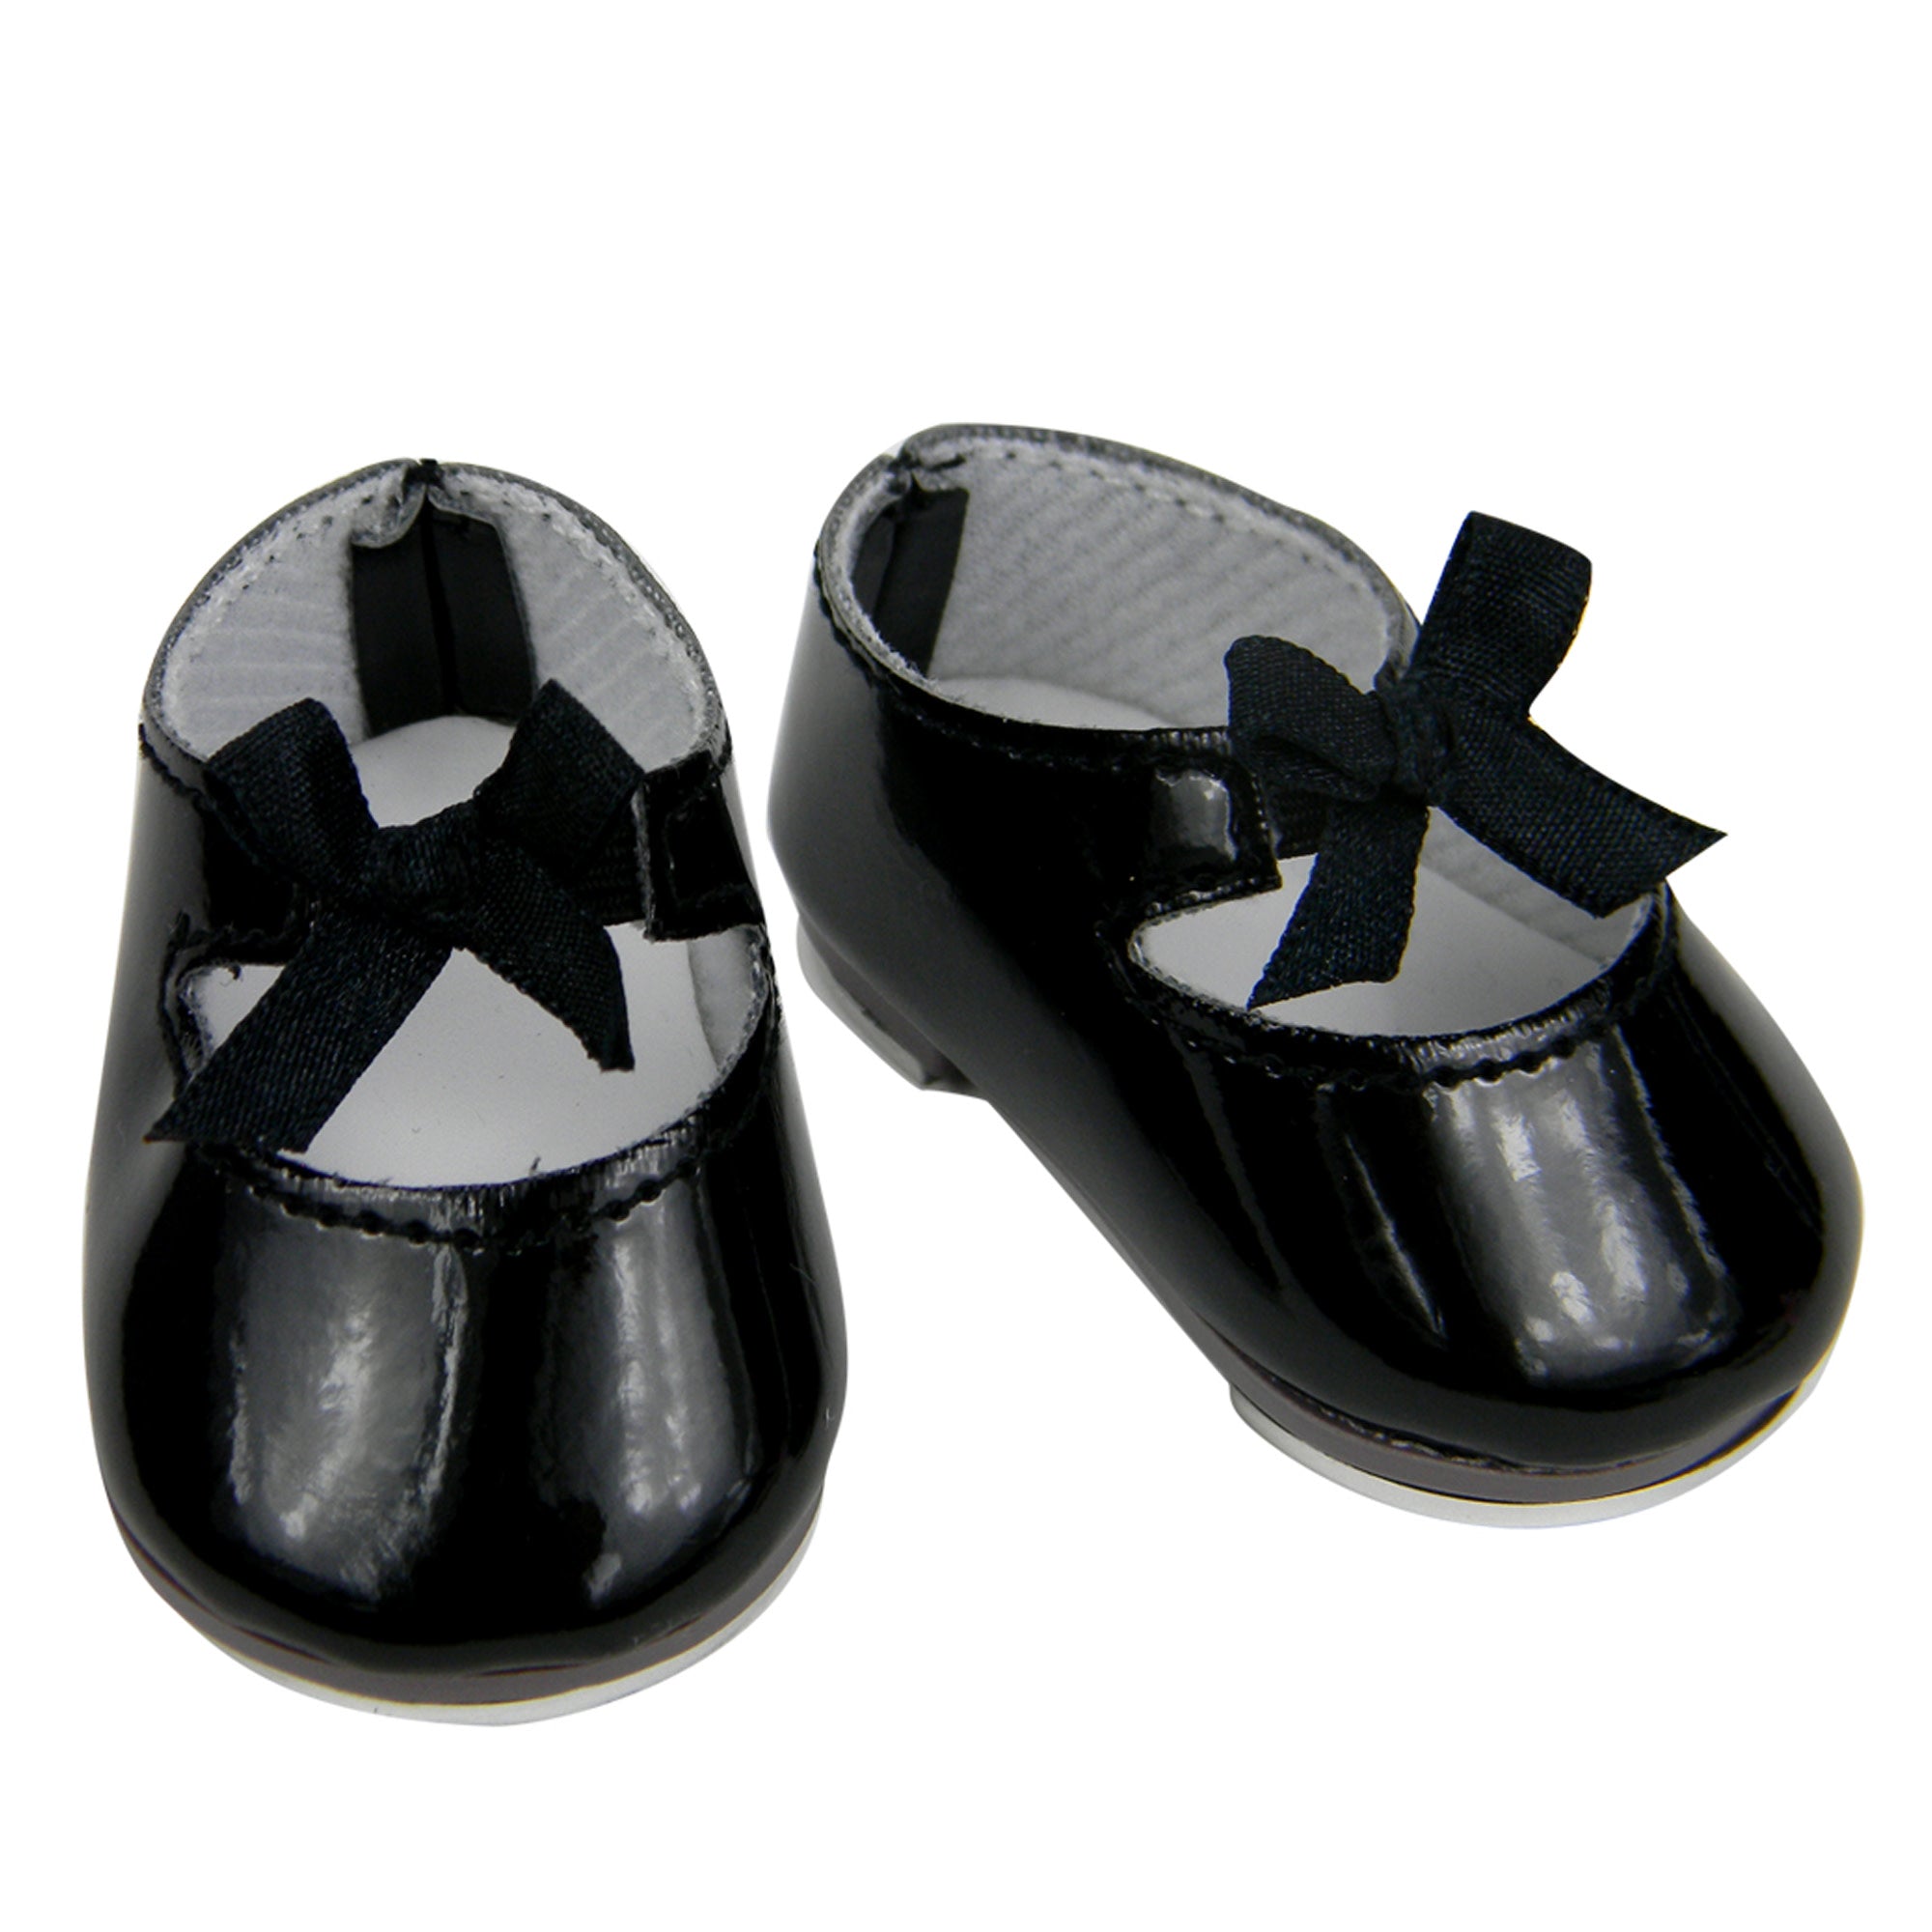 Sophia's Patent Leather Mary Jane Style Tap Shoes with Bow for 18" Dolls, Black